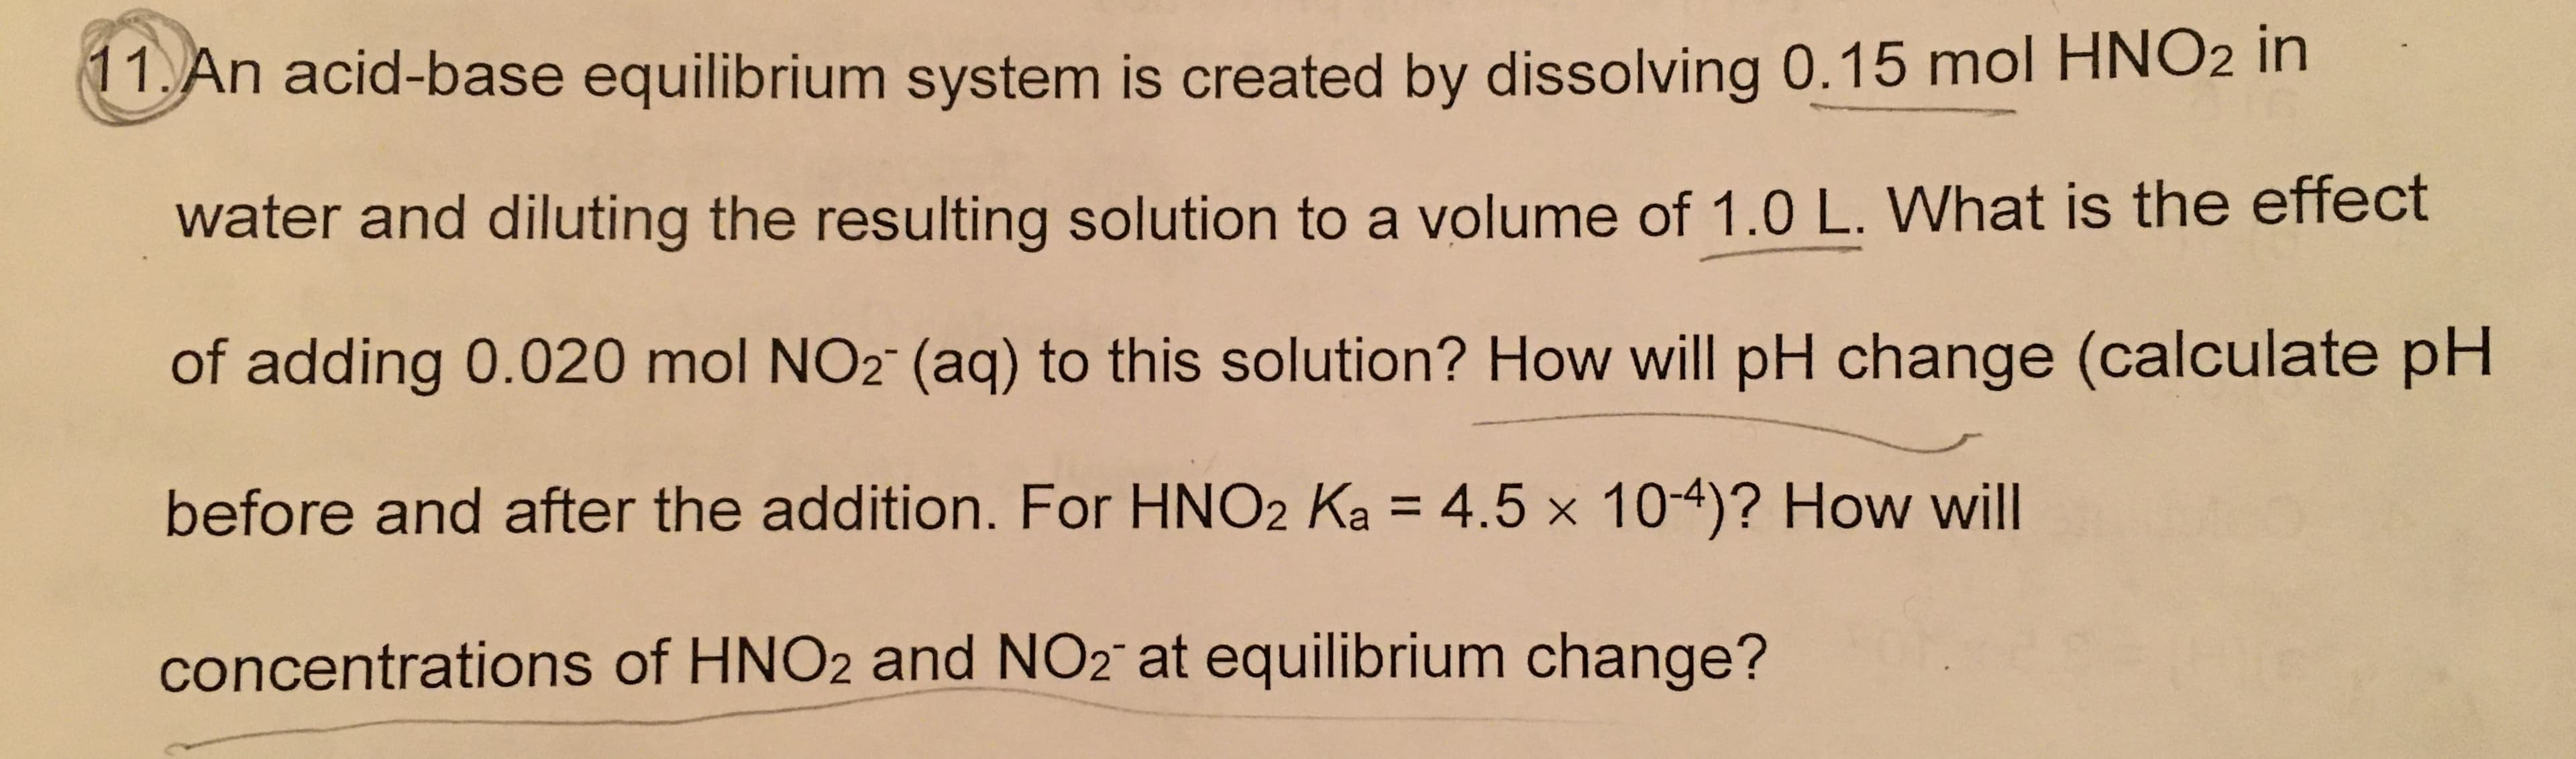 11.An acid-base equilibrium system is created by dissolving 0.15 mol HNO2 in
water and diluting the resulting solution to a volume of 1.0 L. What is the effect
of adding 0.020 mol NO2 (aq) to this solution? How will pH change (calculate pH
before and after the addition. For HNO2 Ka = 4.5 x 104)? How will
concentrations of HNO2 and NO2 at equilibrium change?
